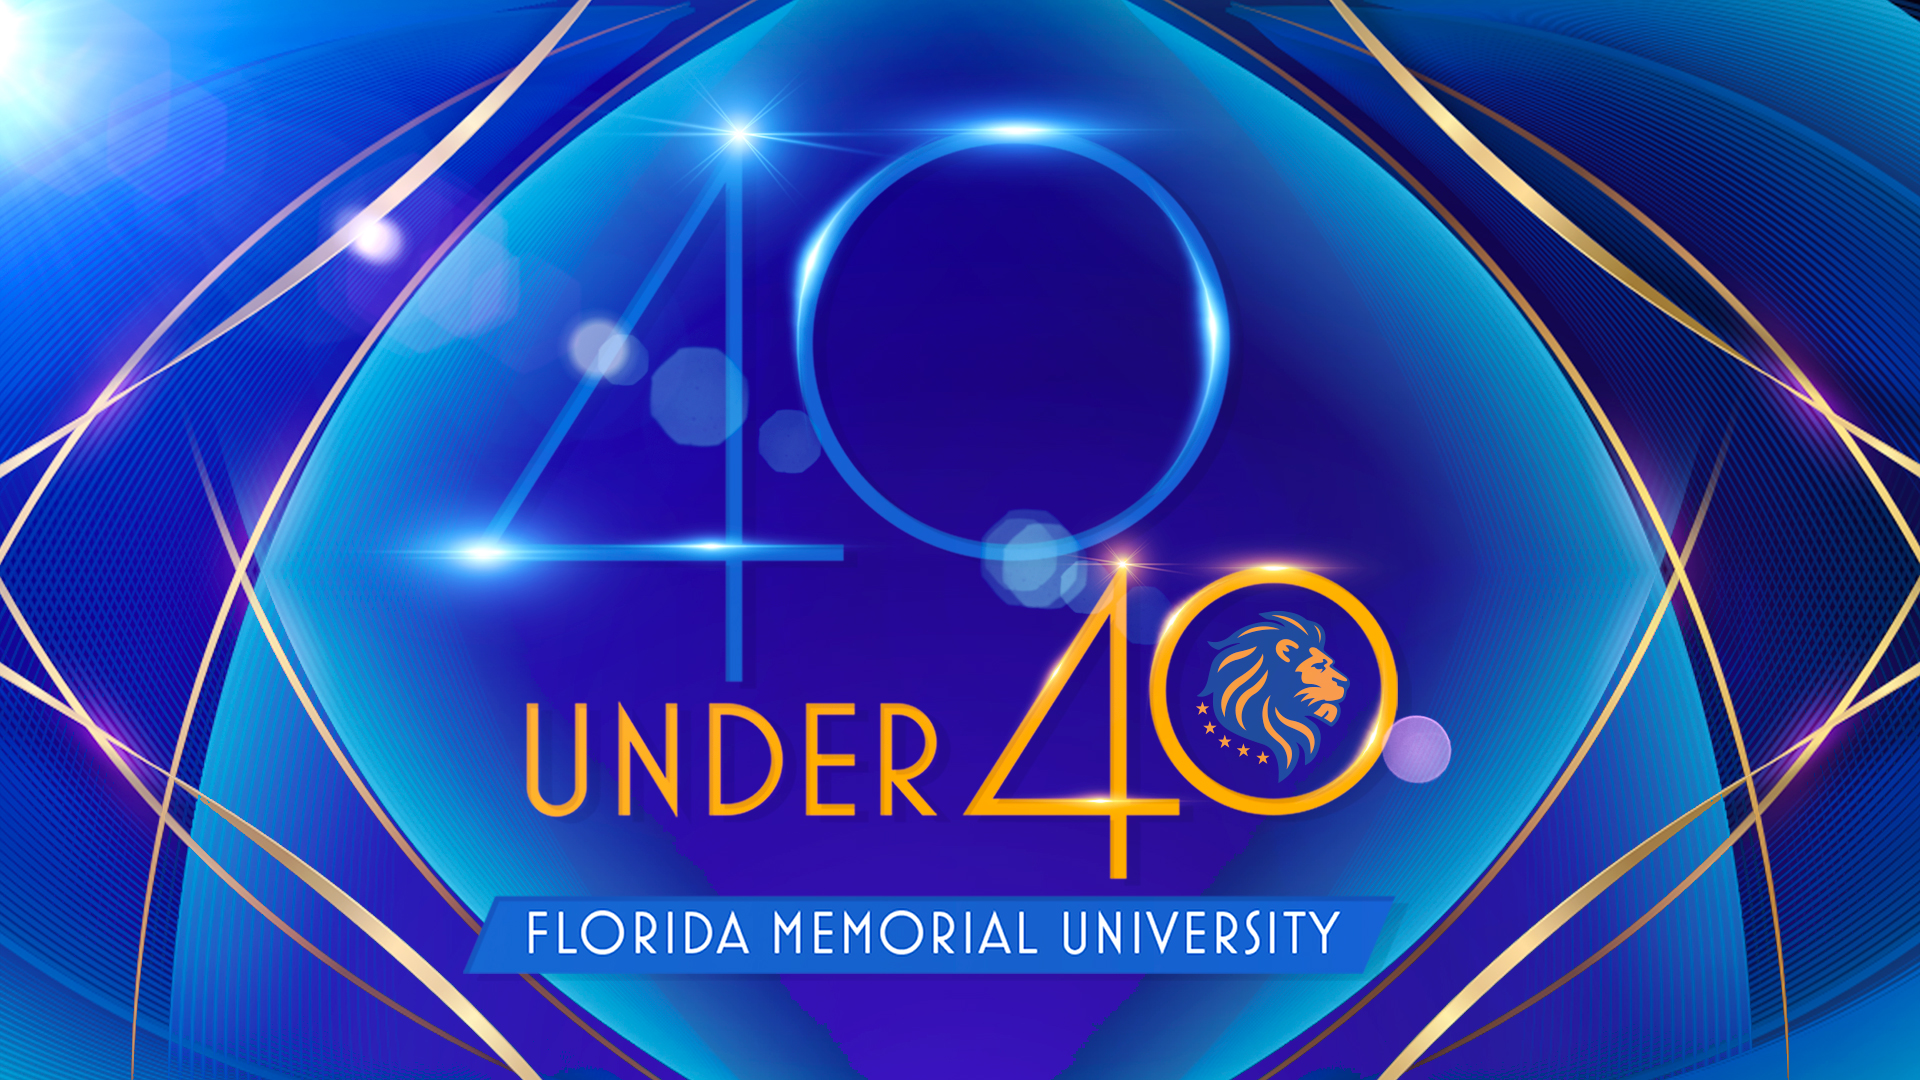 FMU 40 Under 40, Thursday, October 18, 2023 at 6 p.m. FMU Smith Conference Center.